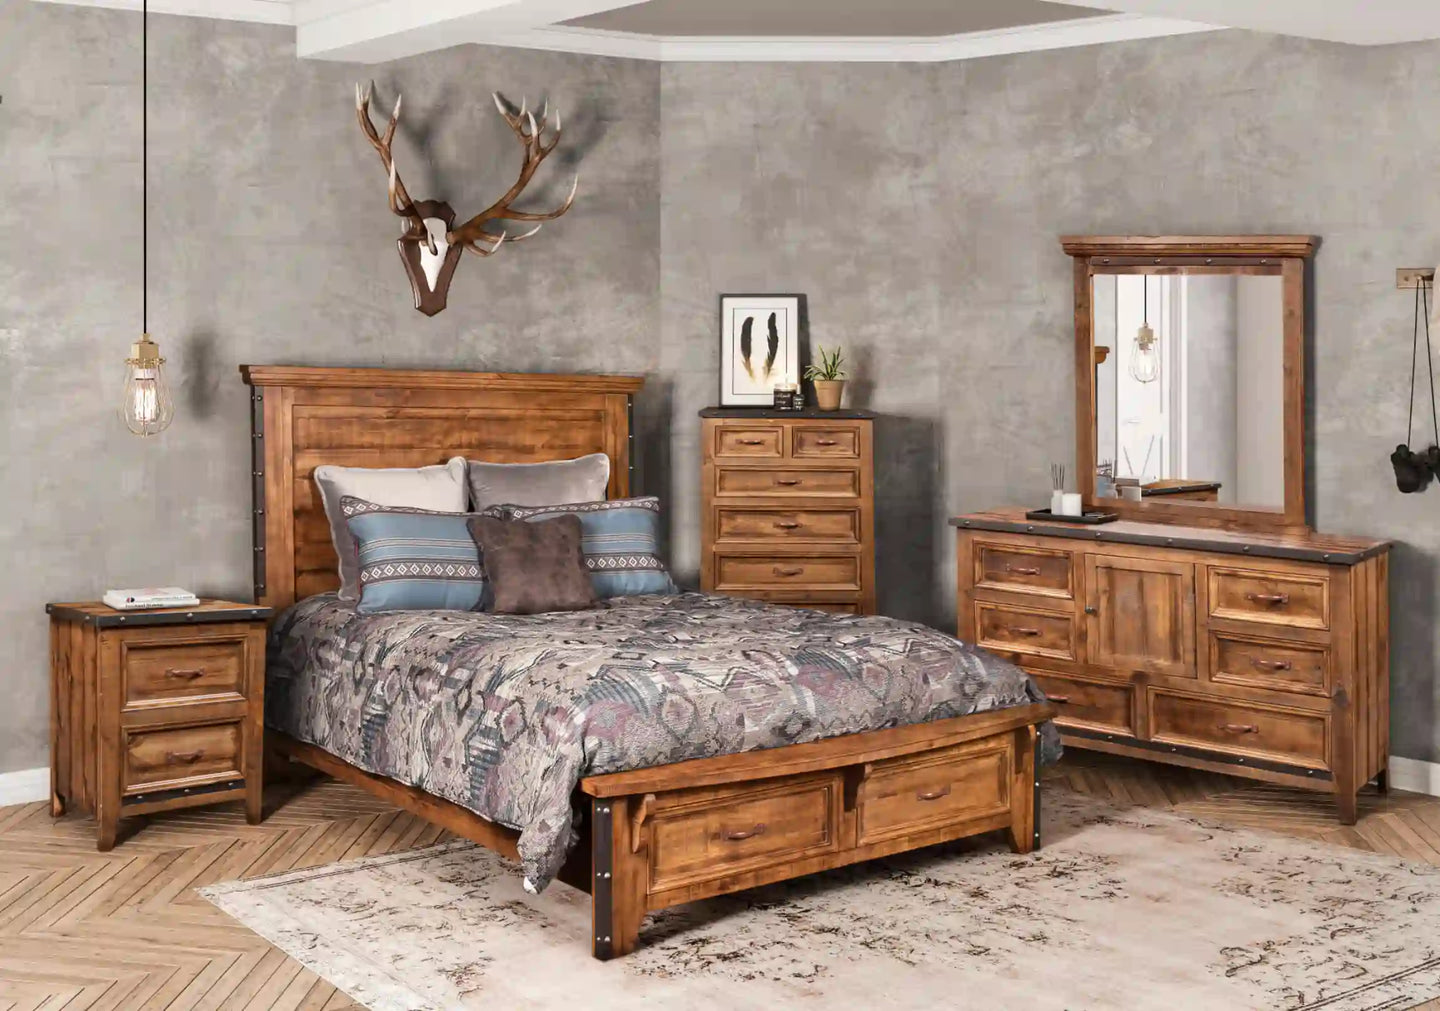 Sunset Trading Rustic City 5 Piece King Bedroom Set